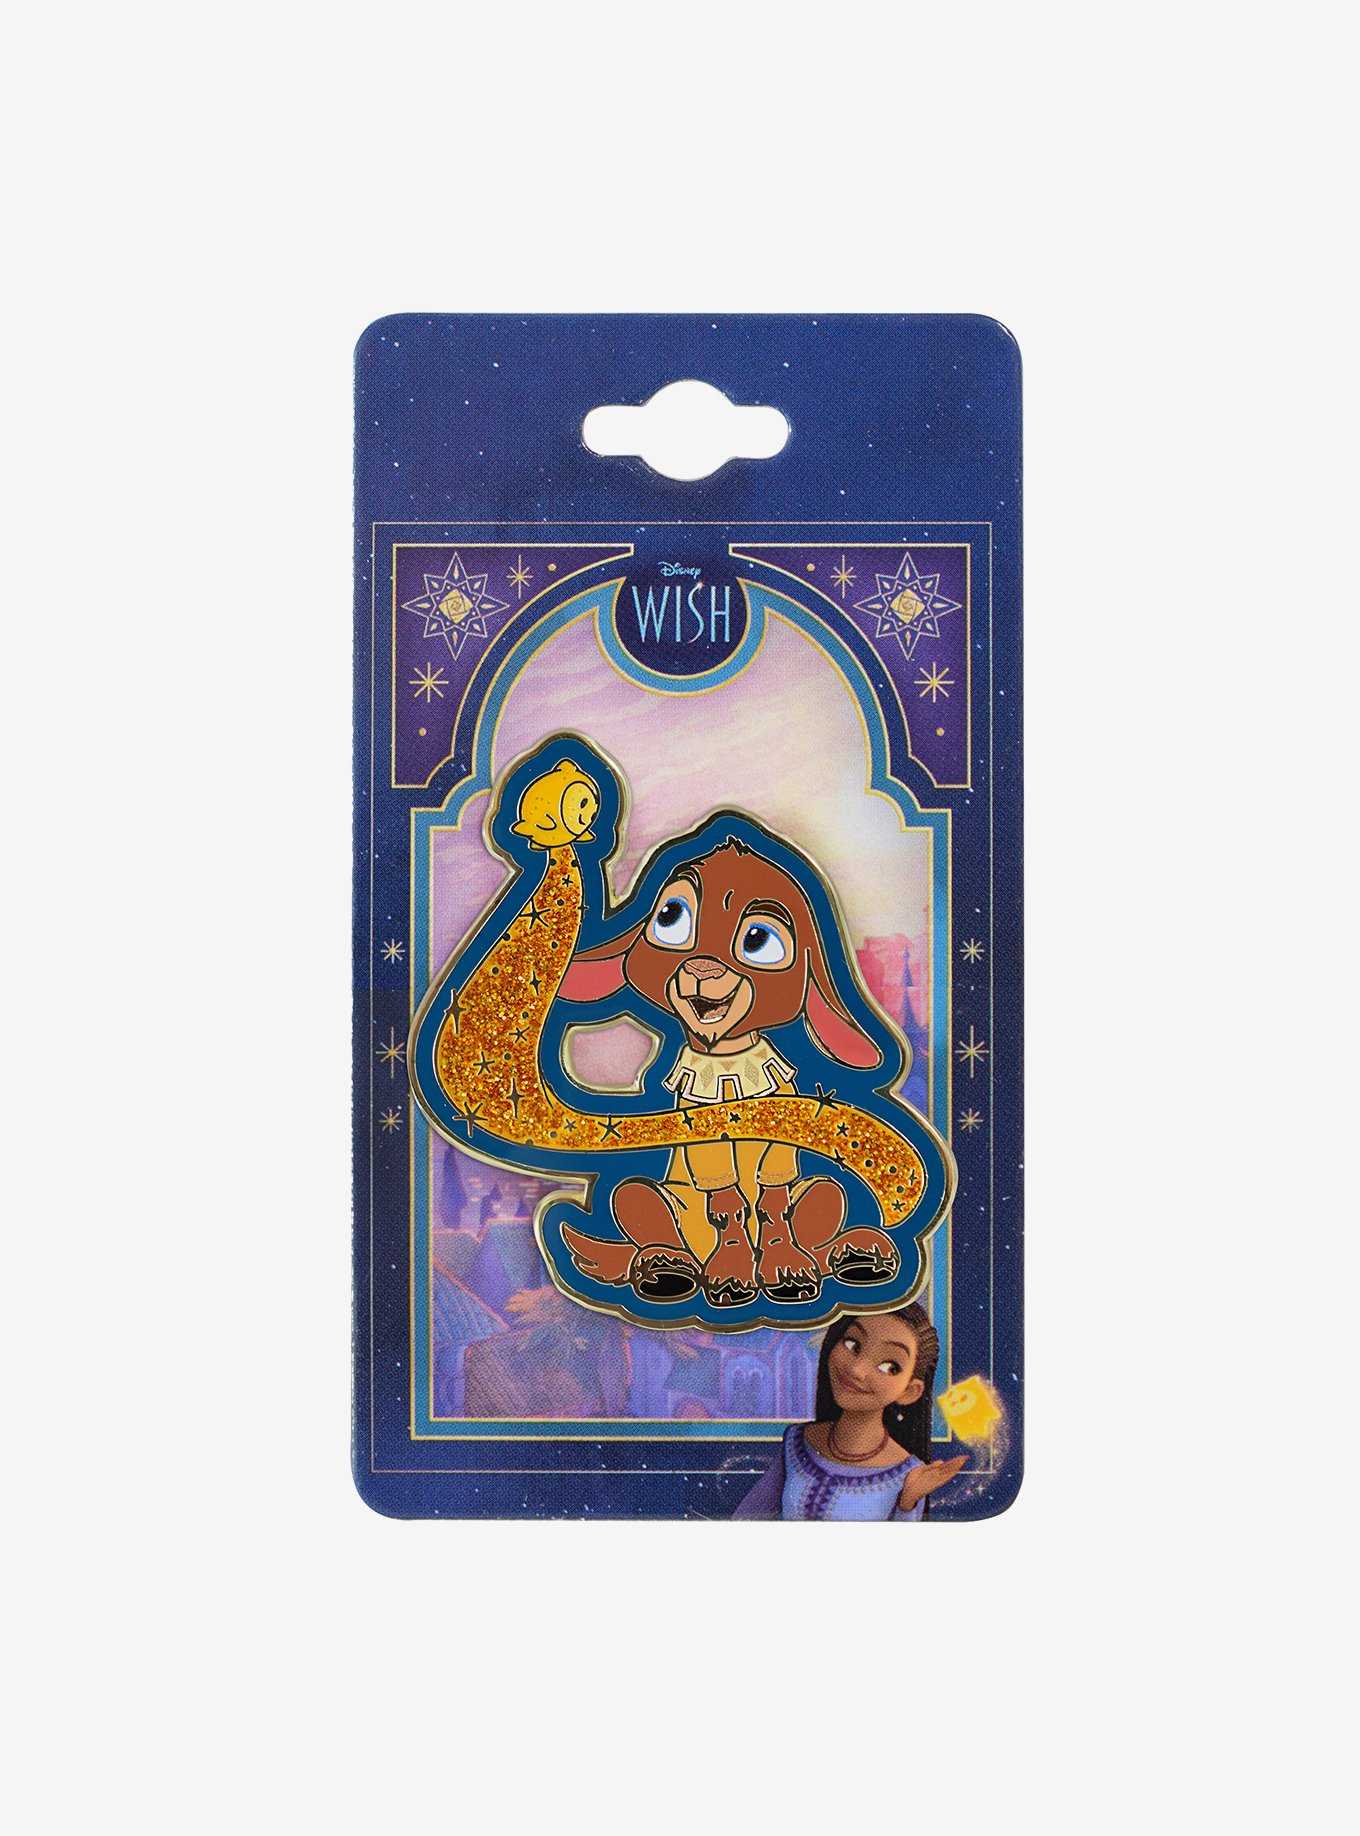 Disney Wish Valentino and Star Glittery Enamel Pin - BoxLunch Exclusive, , hi-res